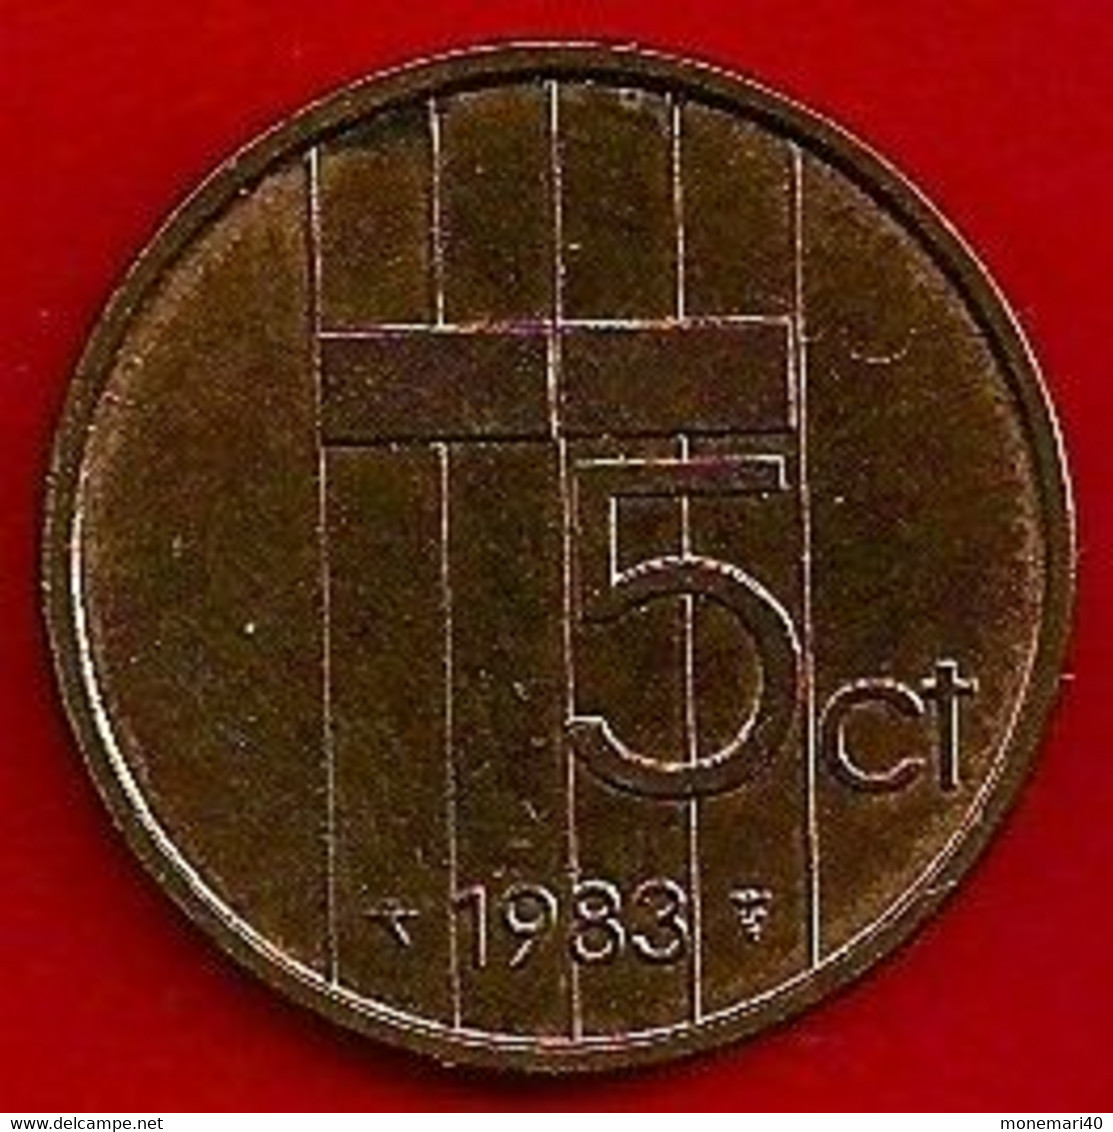 PAYS-BAS 5 CENT - 1983 - Trade Coins